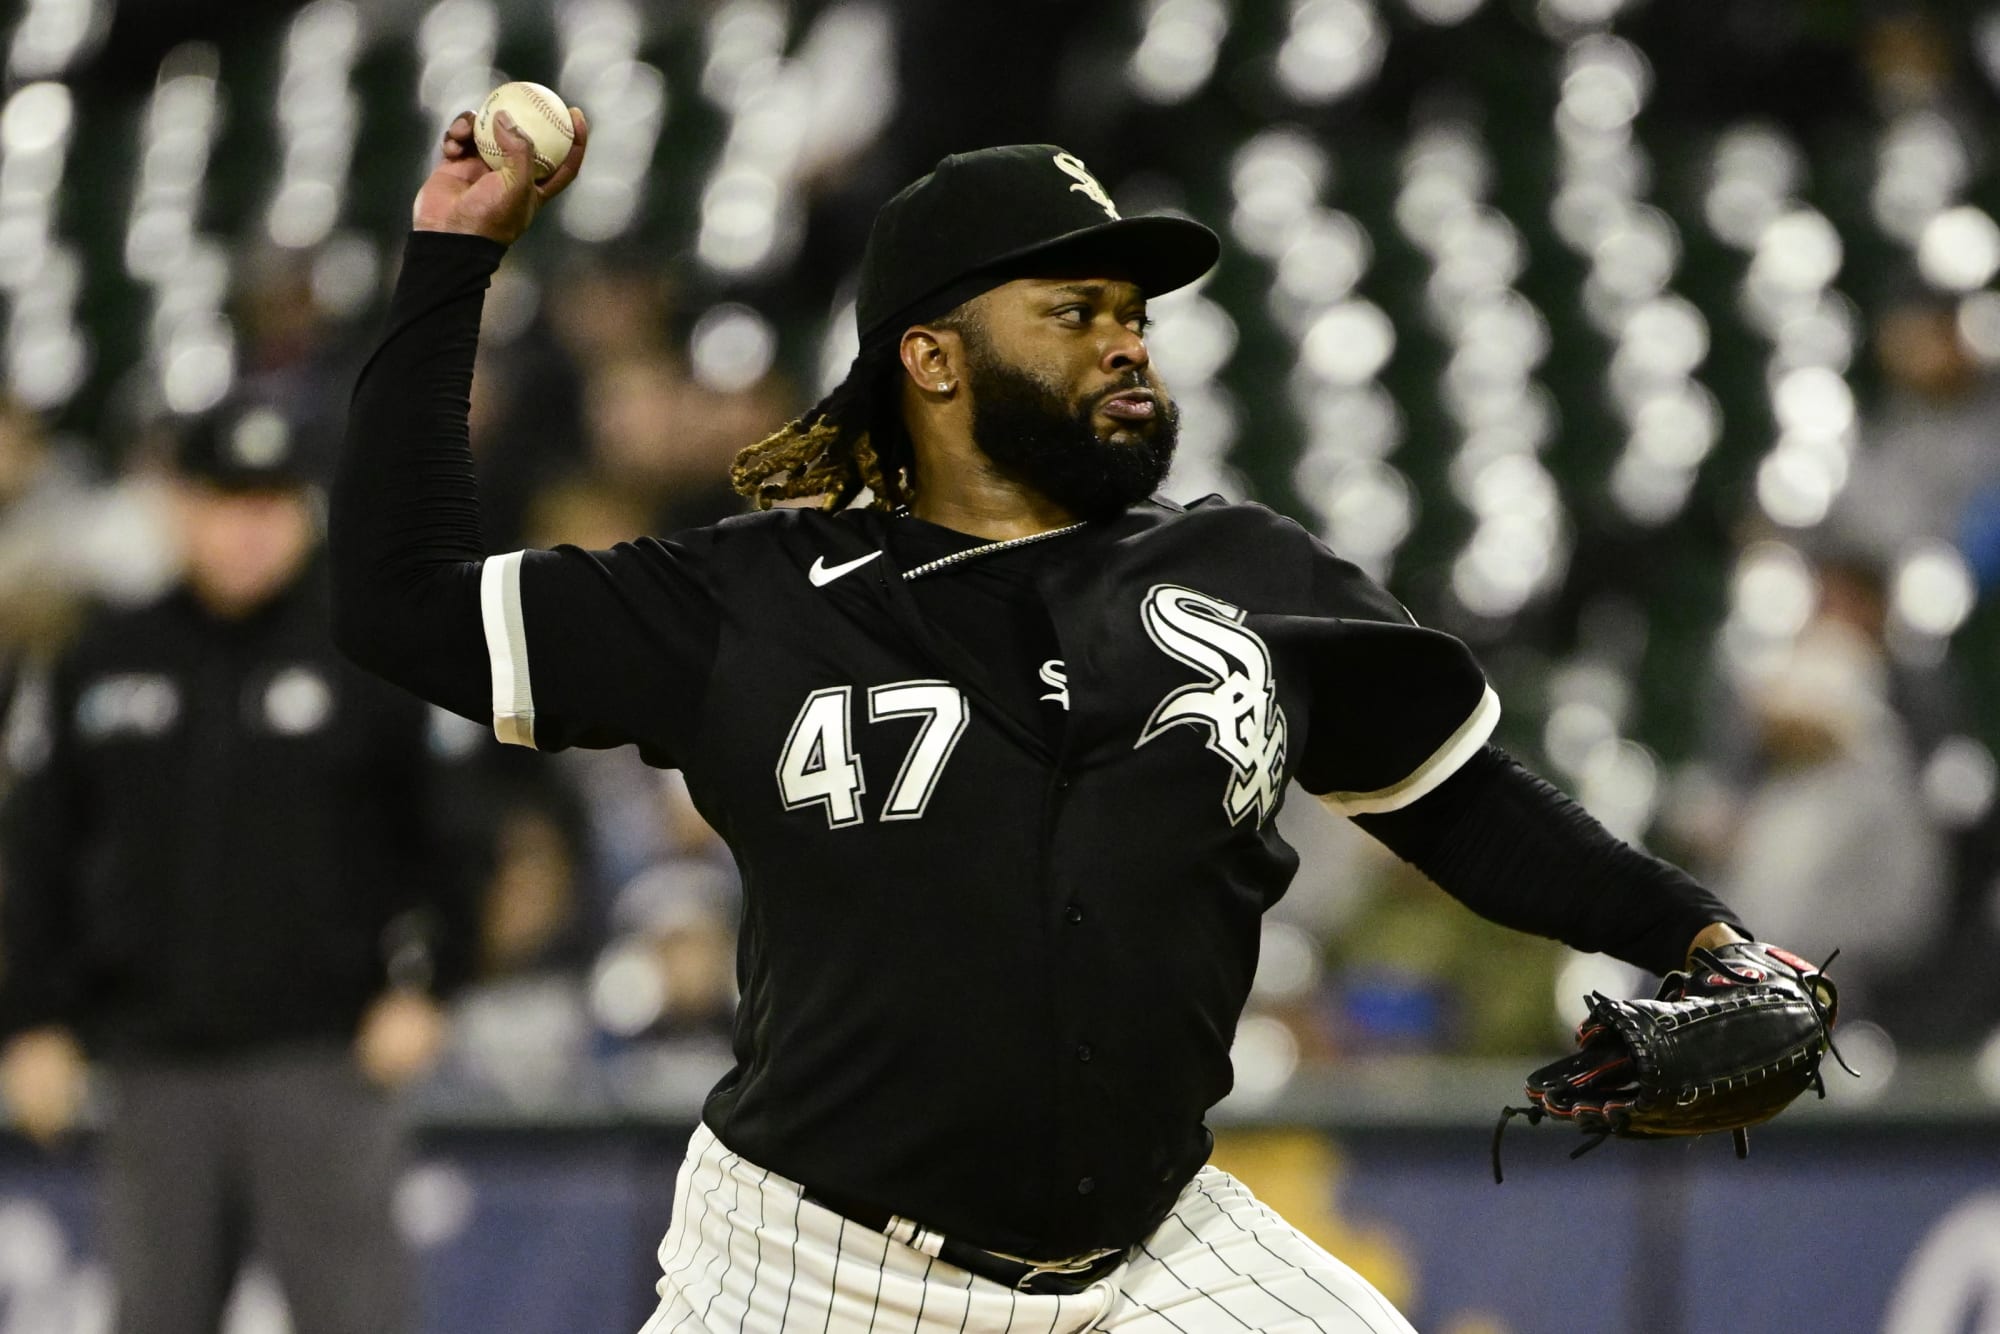 White Sox: Getting swept at home by the Guardians is embarrassing